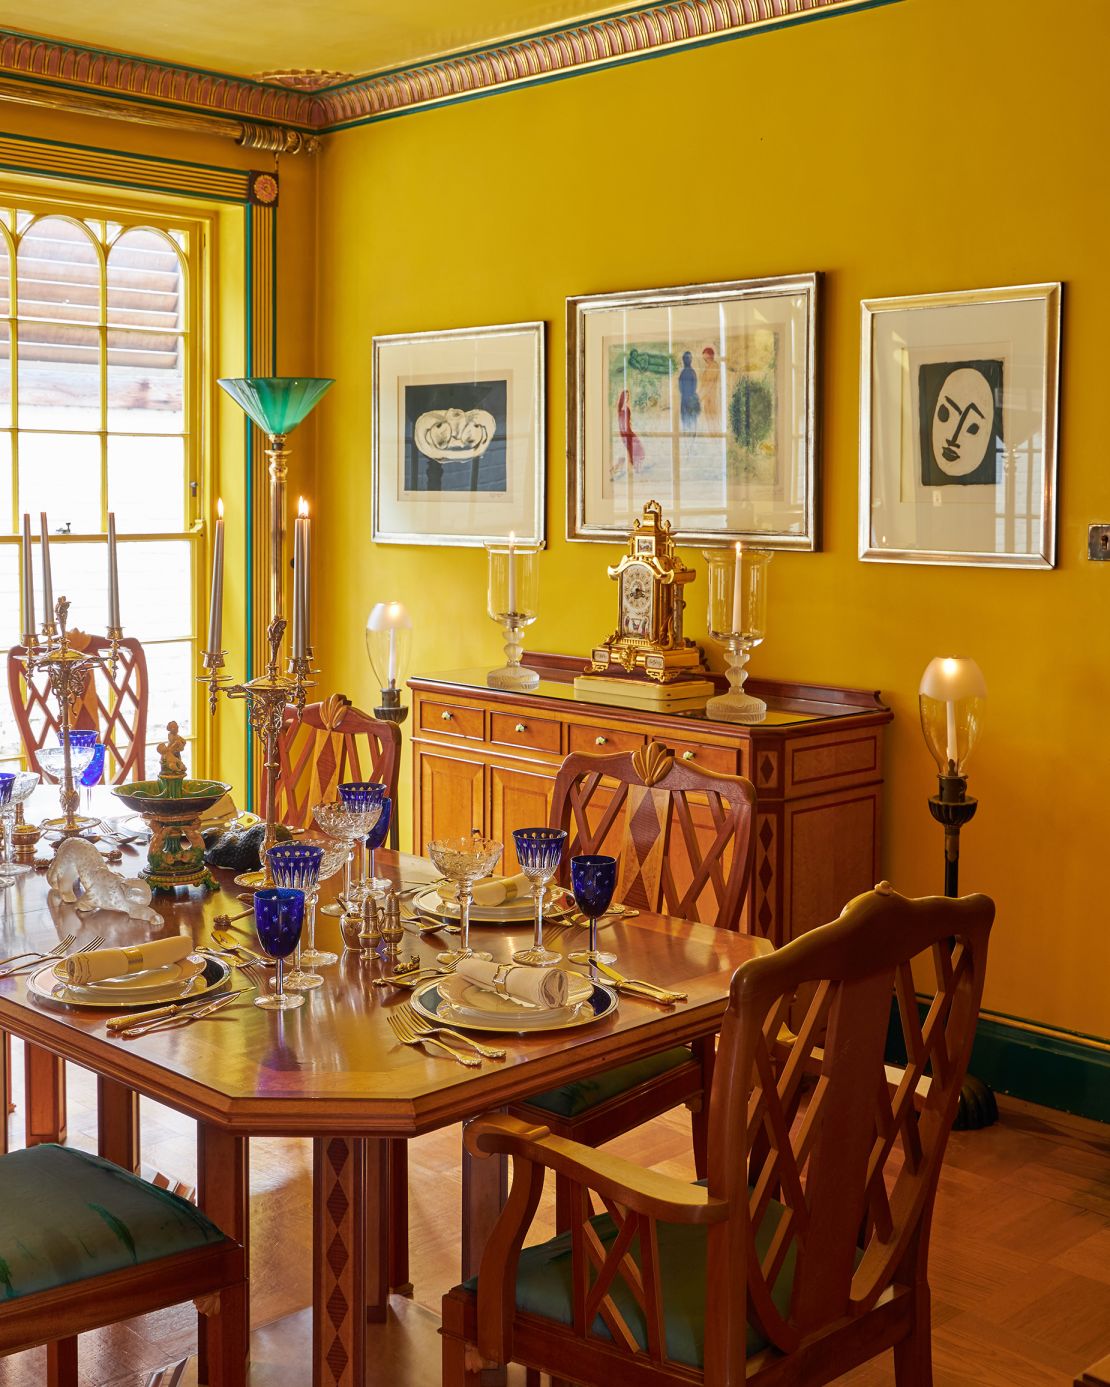 The home's dining room, painted in Mercury's favorite color yellow.